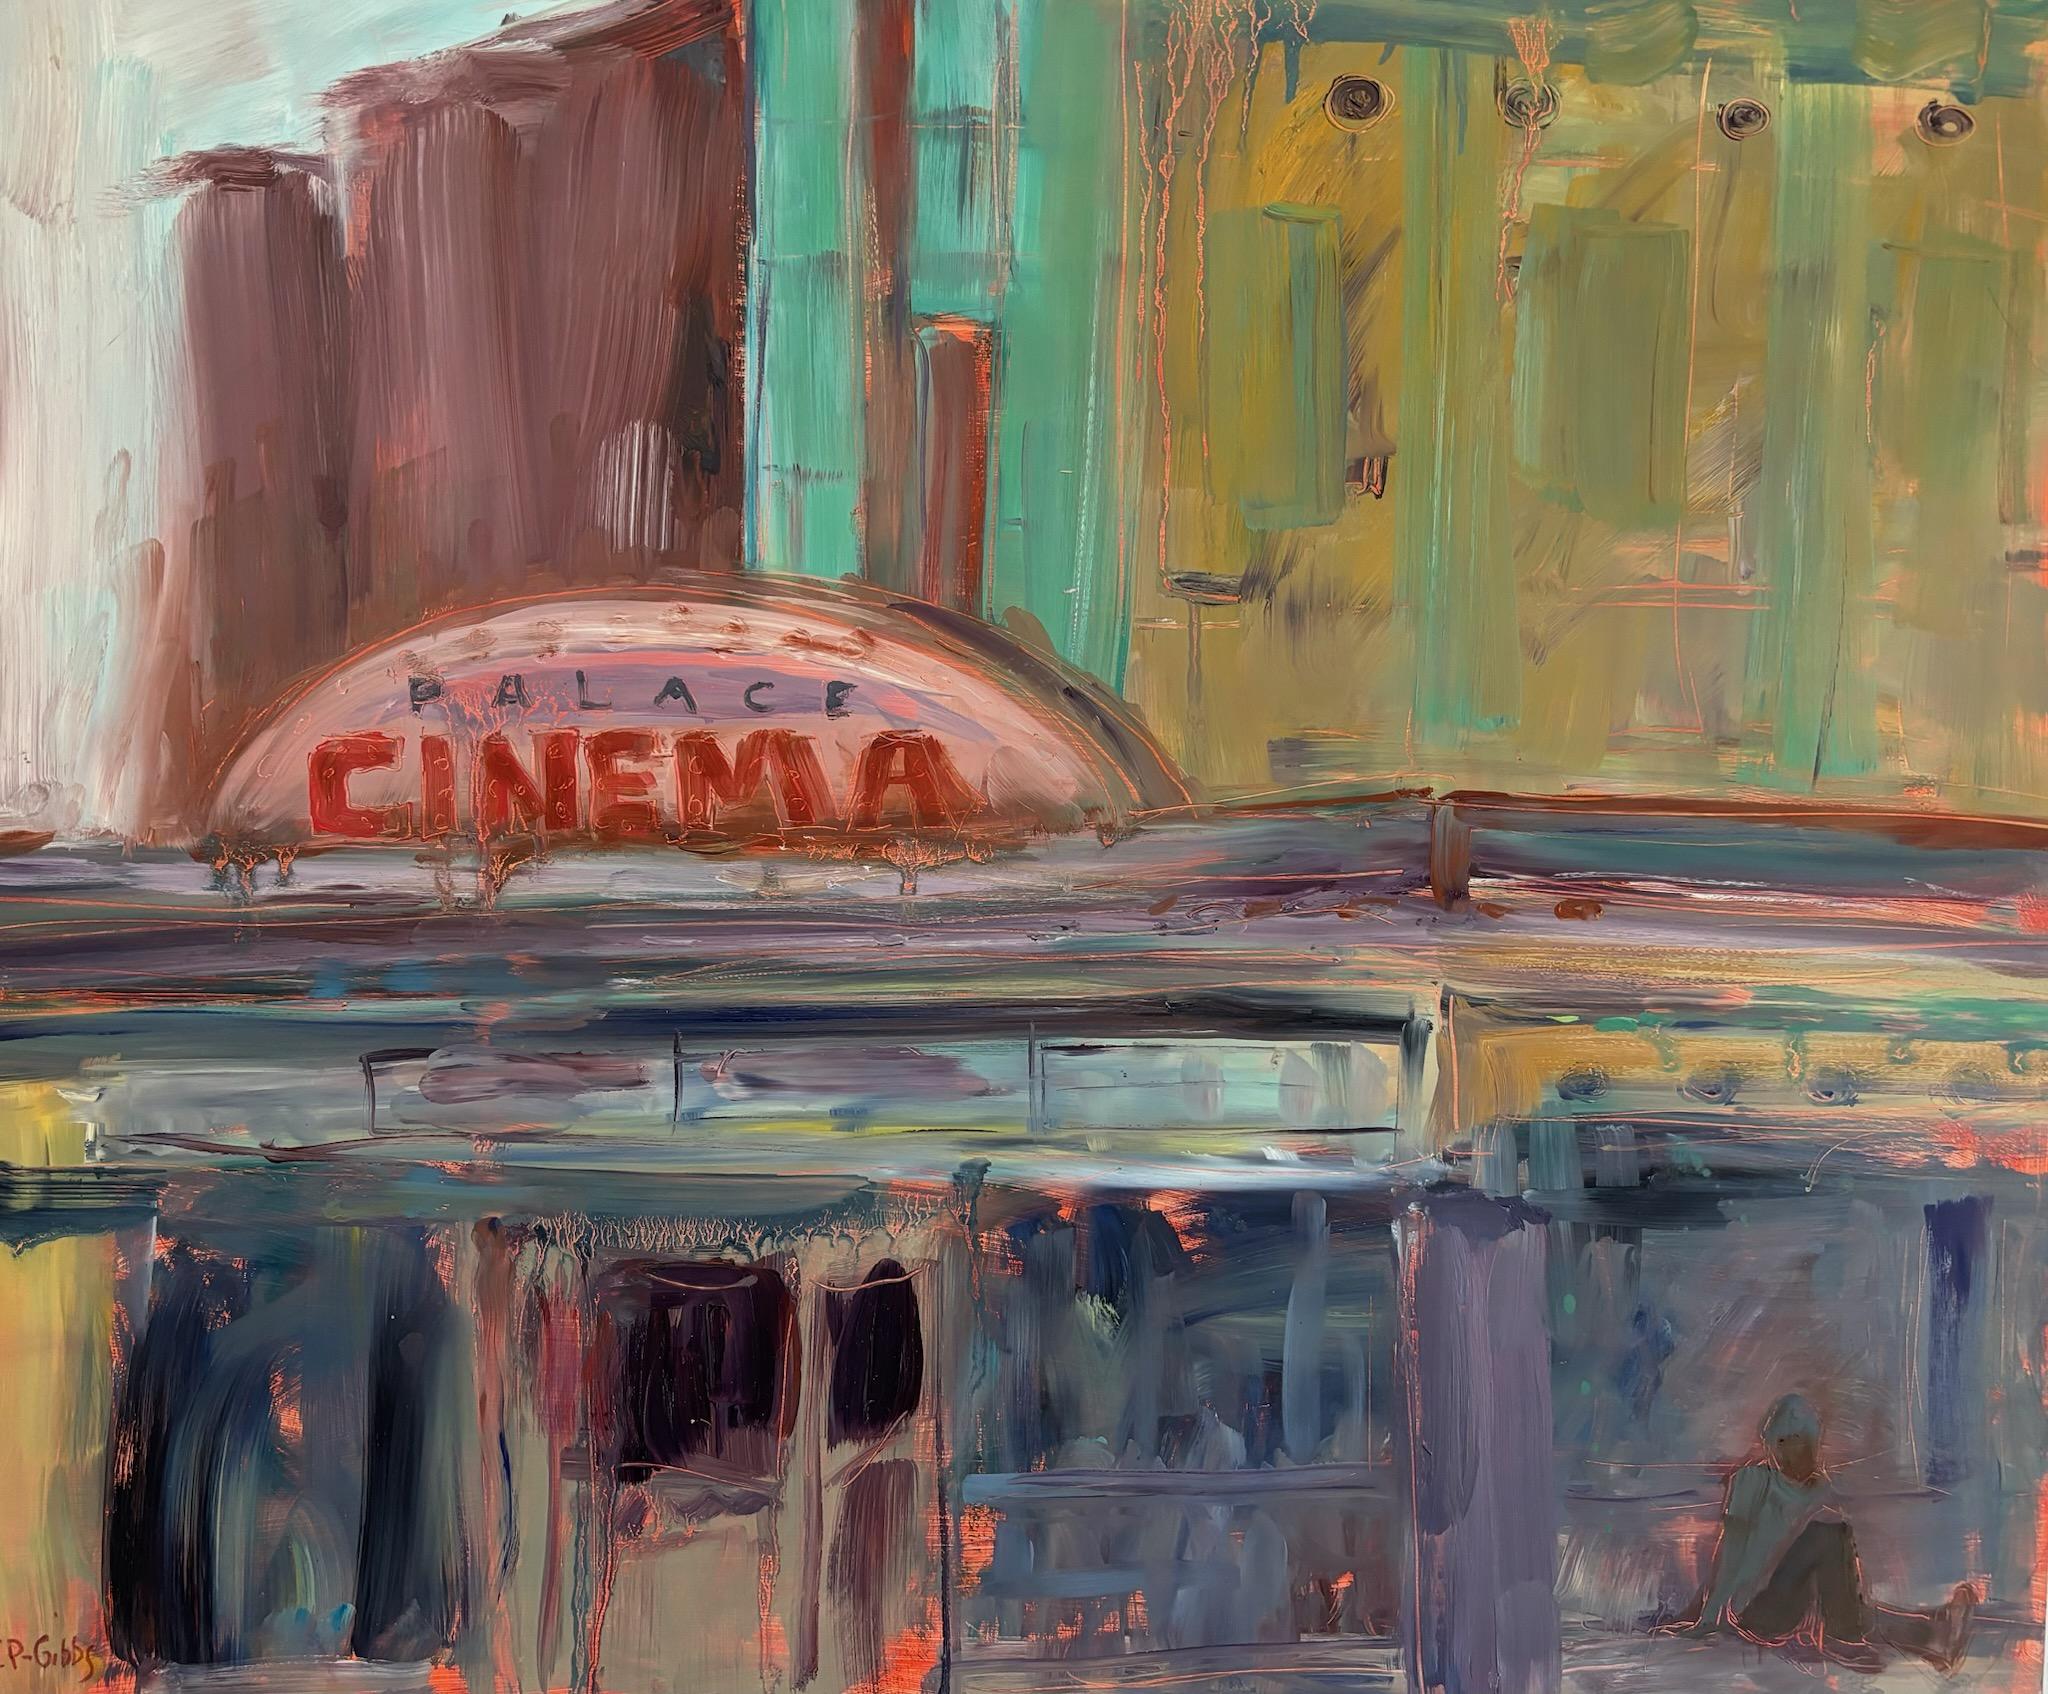 Catherine Picard-Gibbs Landscape Painting - "Palace Cinema", expressionist, urban, purple, gray, yellow, blue, oil painting